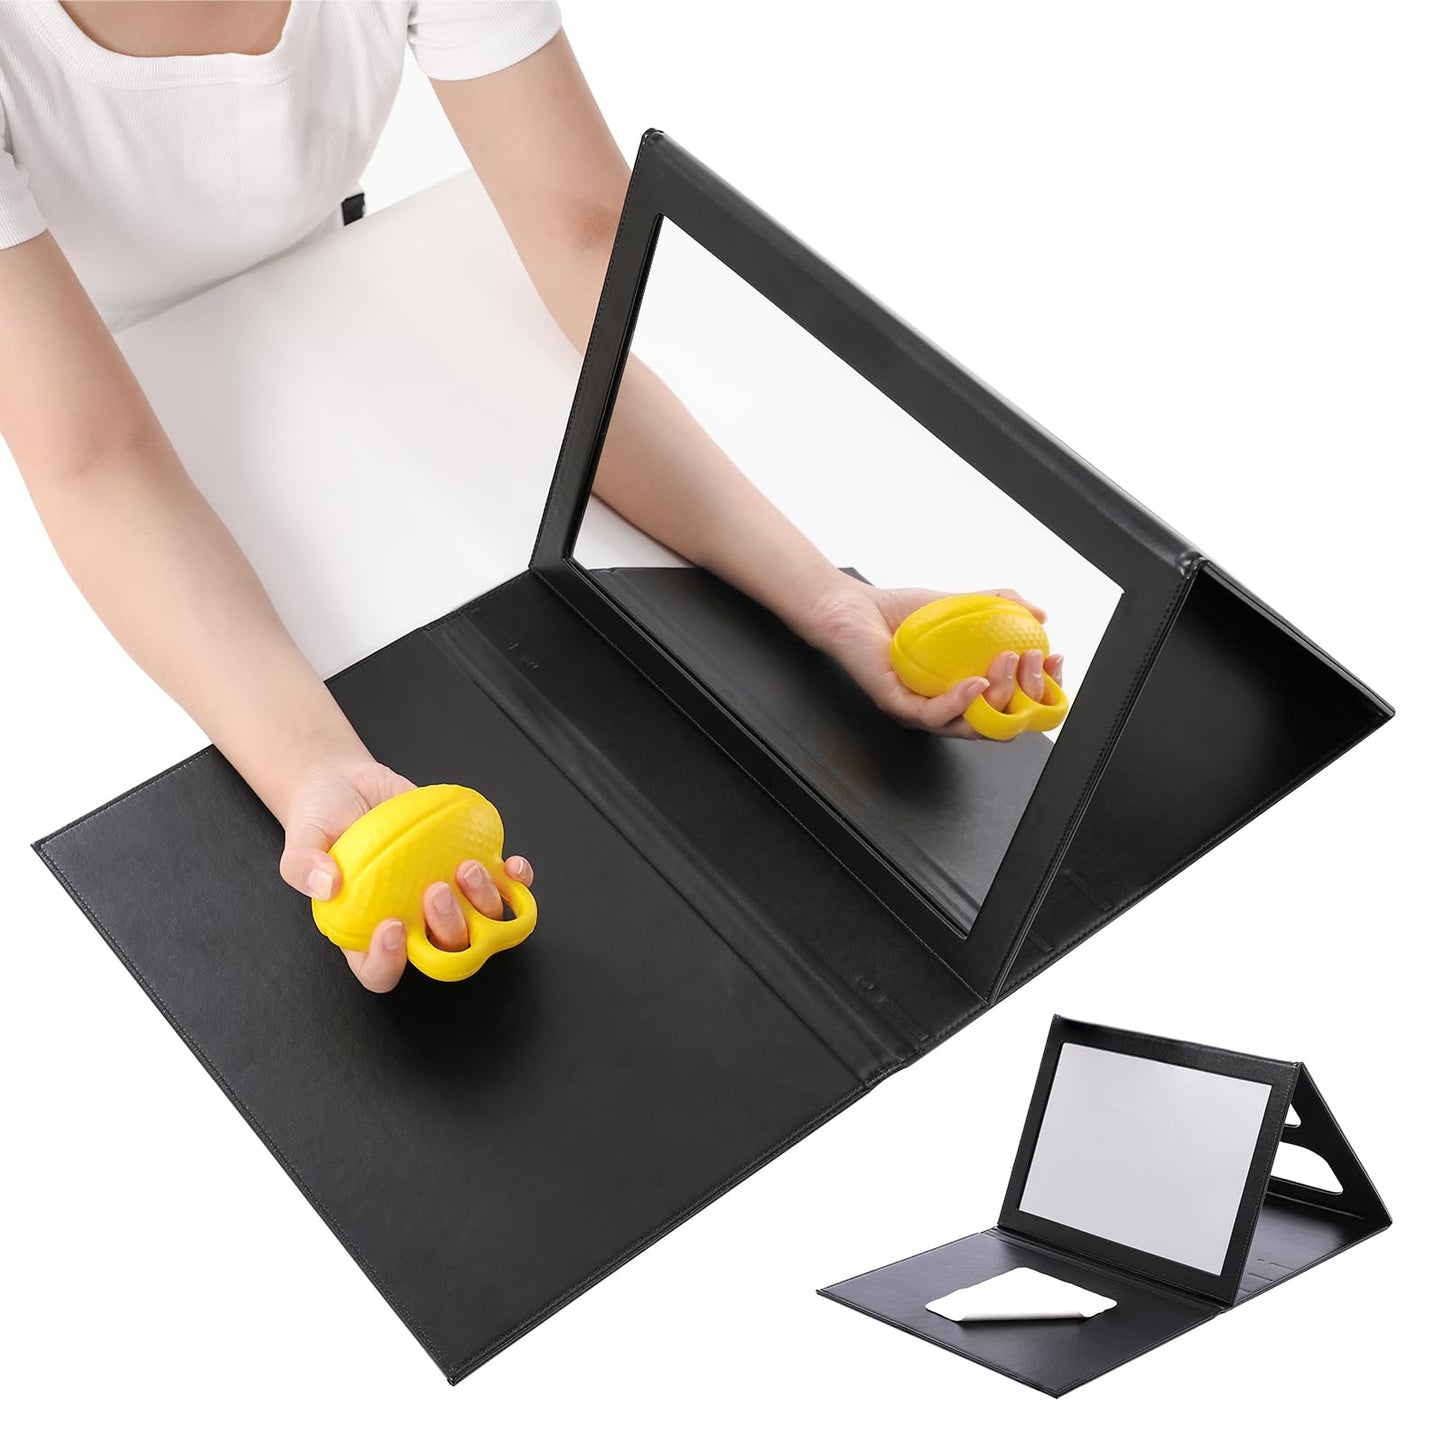 Fewener Mirror Therapy Box for Stroke Rehabilitation - Large Visual Range, Folding & Adjustable Mirror Box for Hand & Arm Exercise